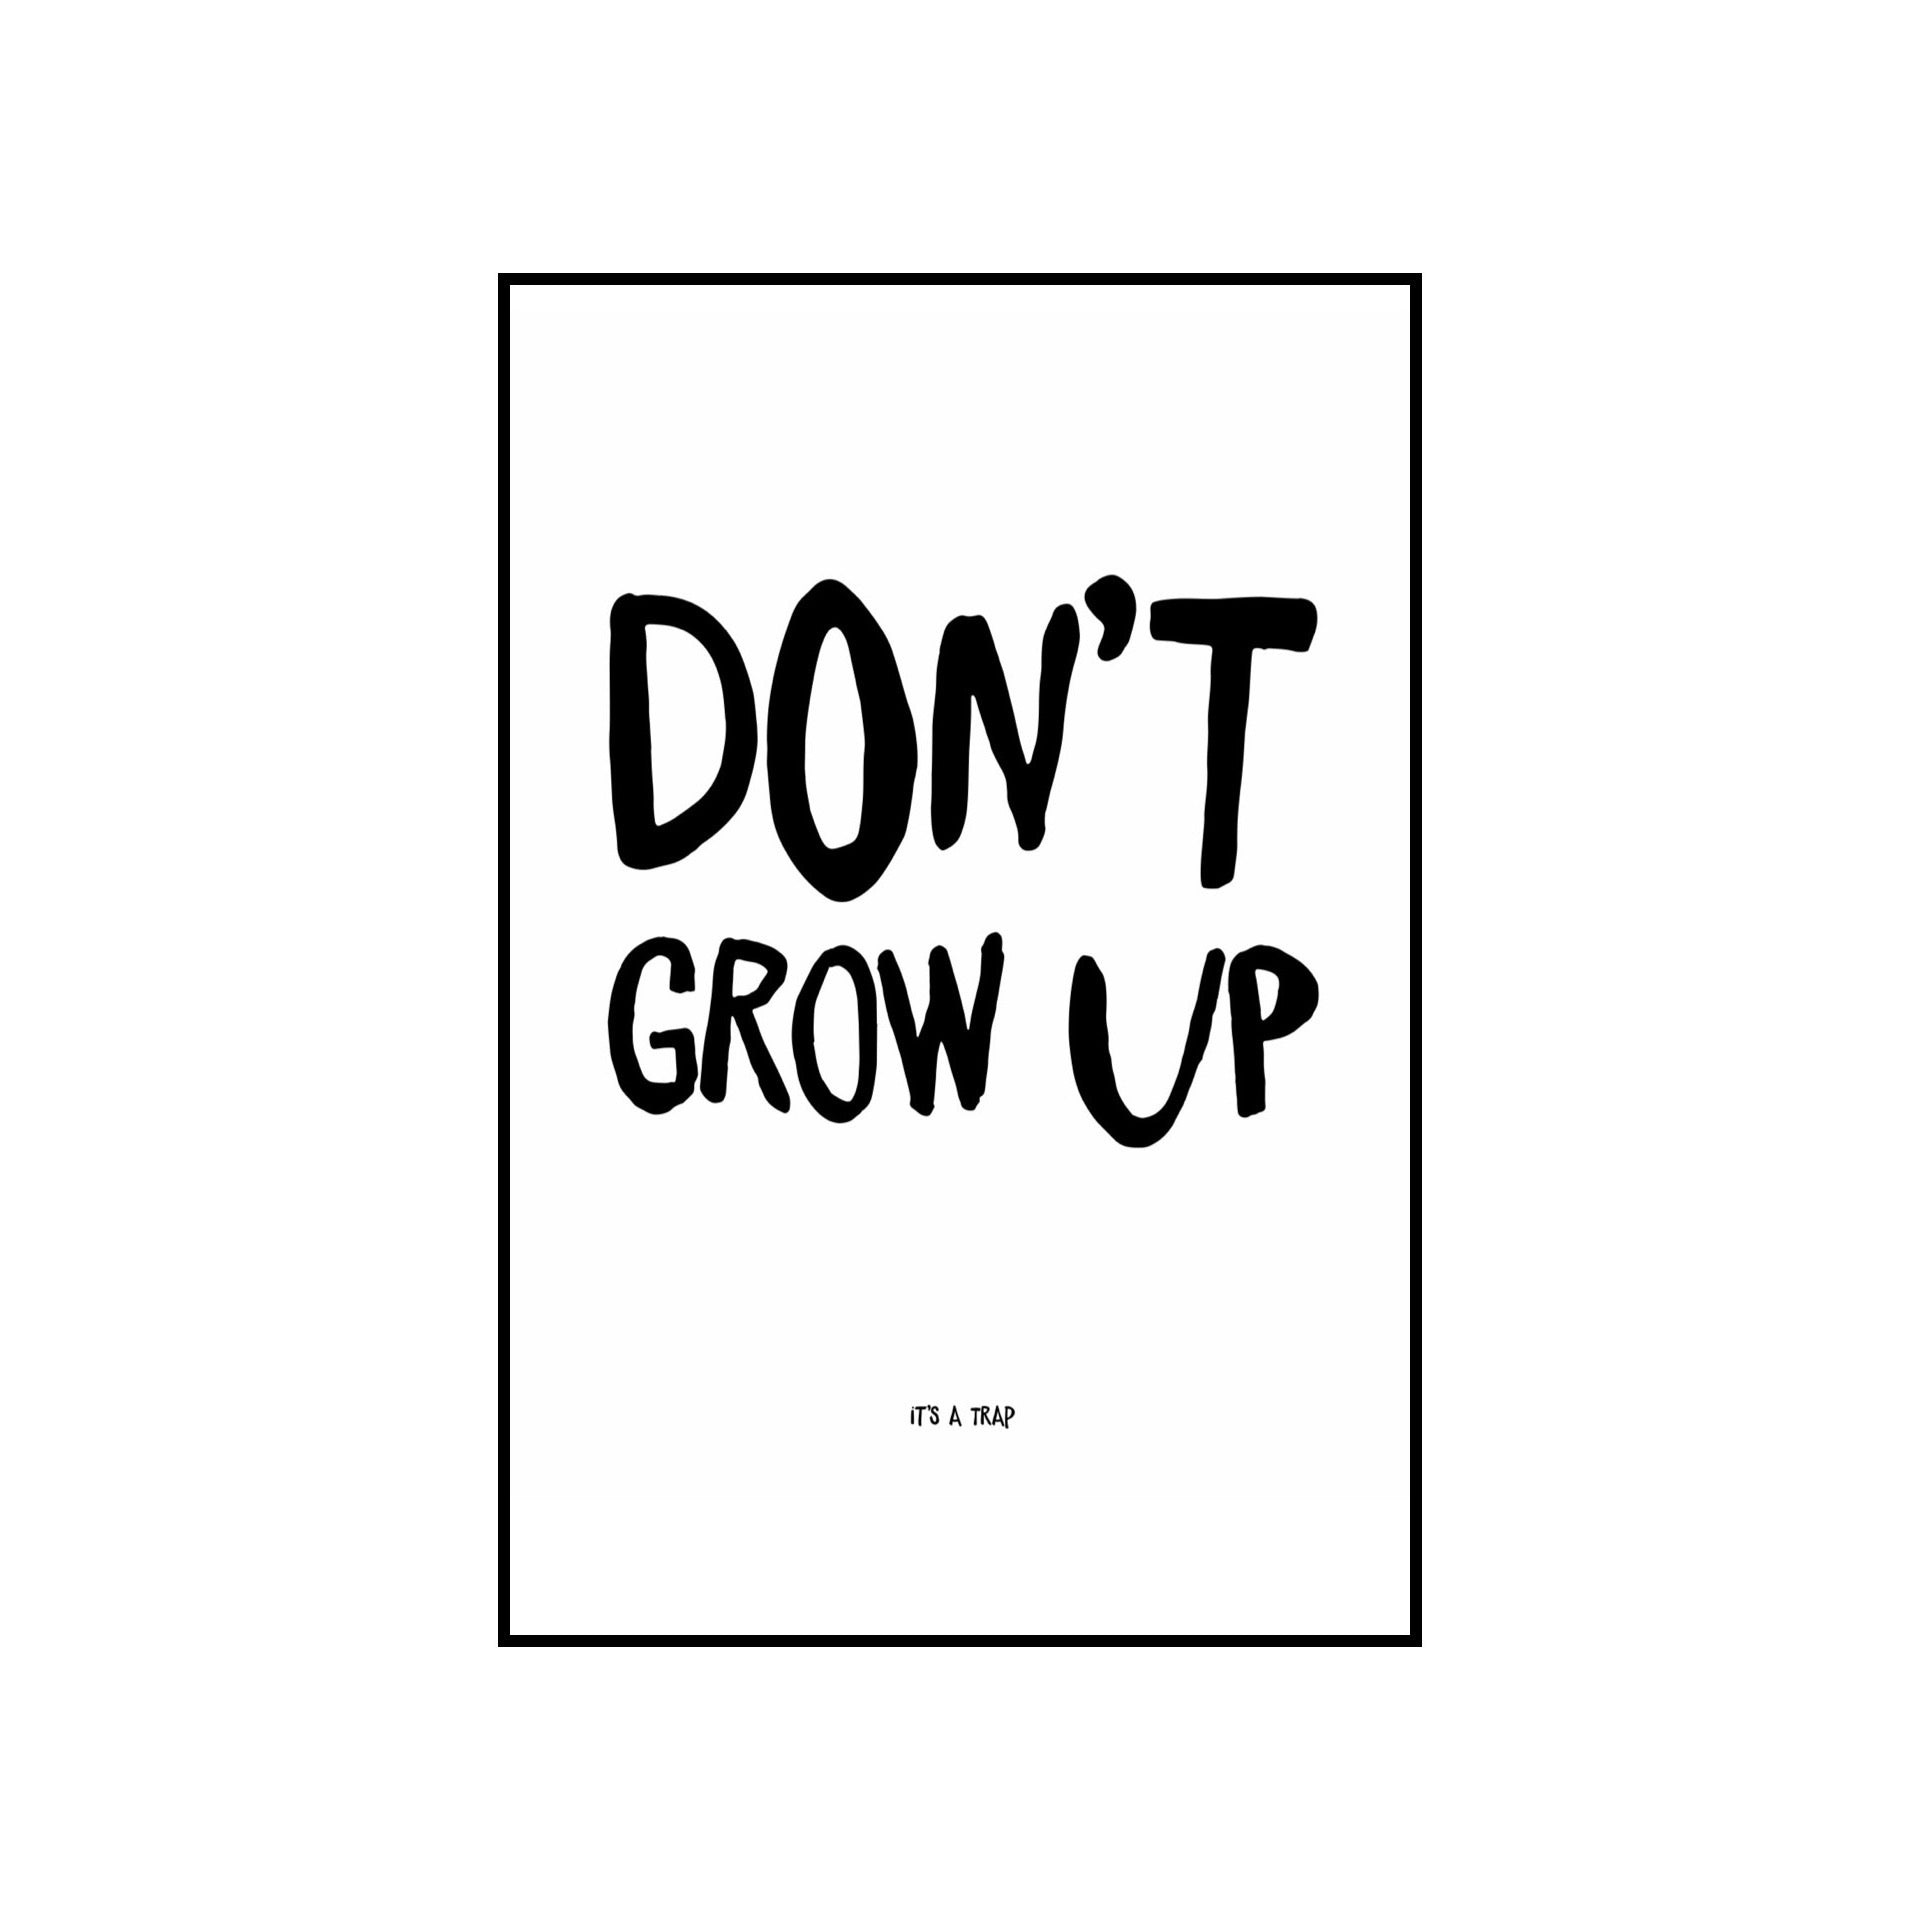 Don’t grow up it’s a trap - THE WALL STYLIST